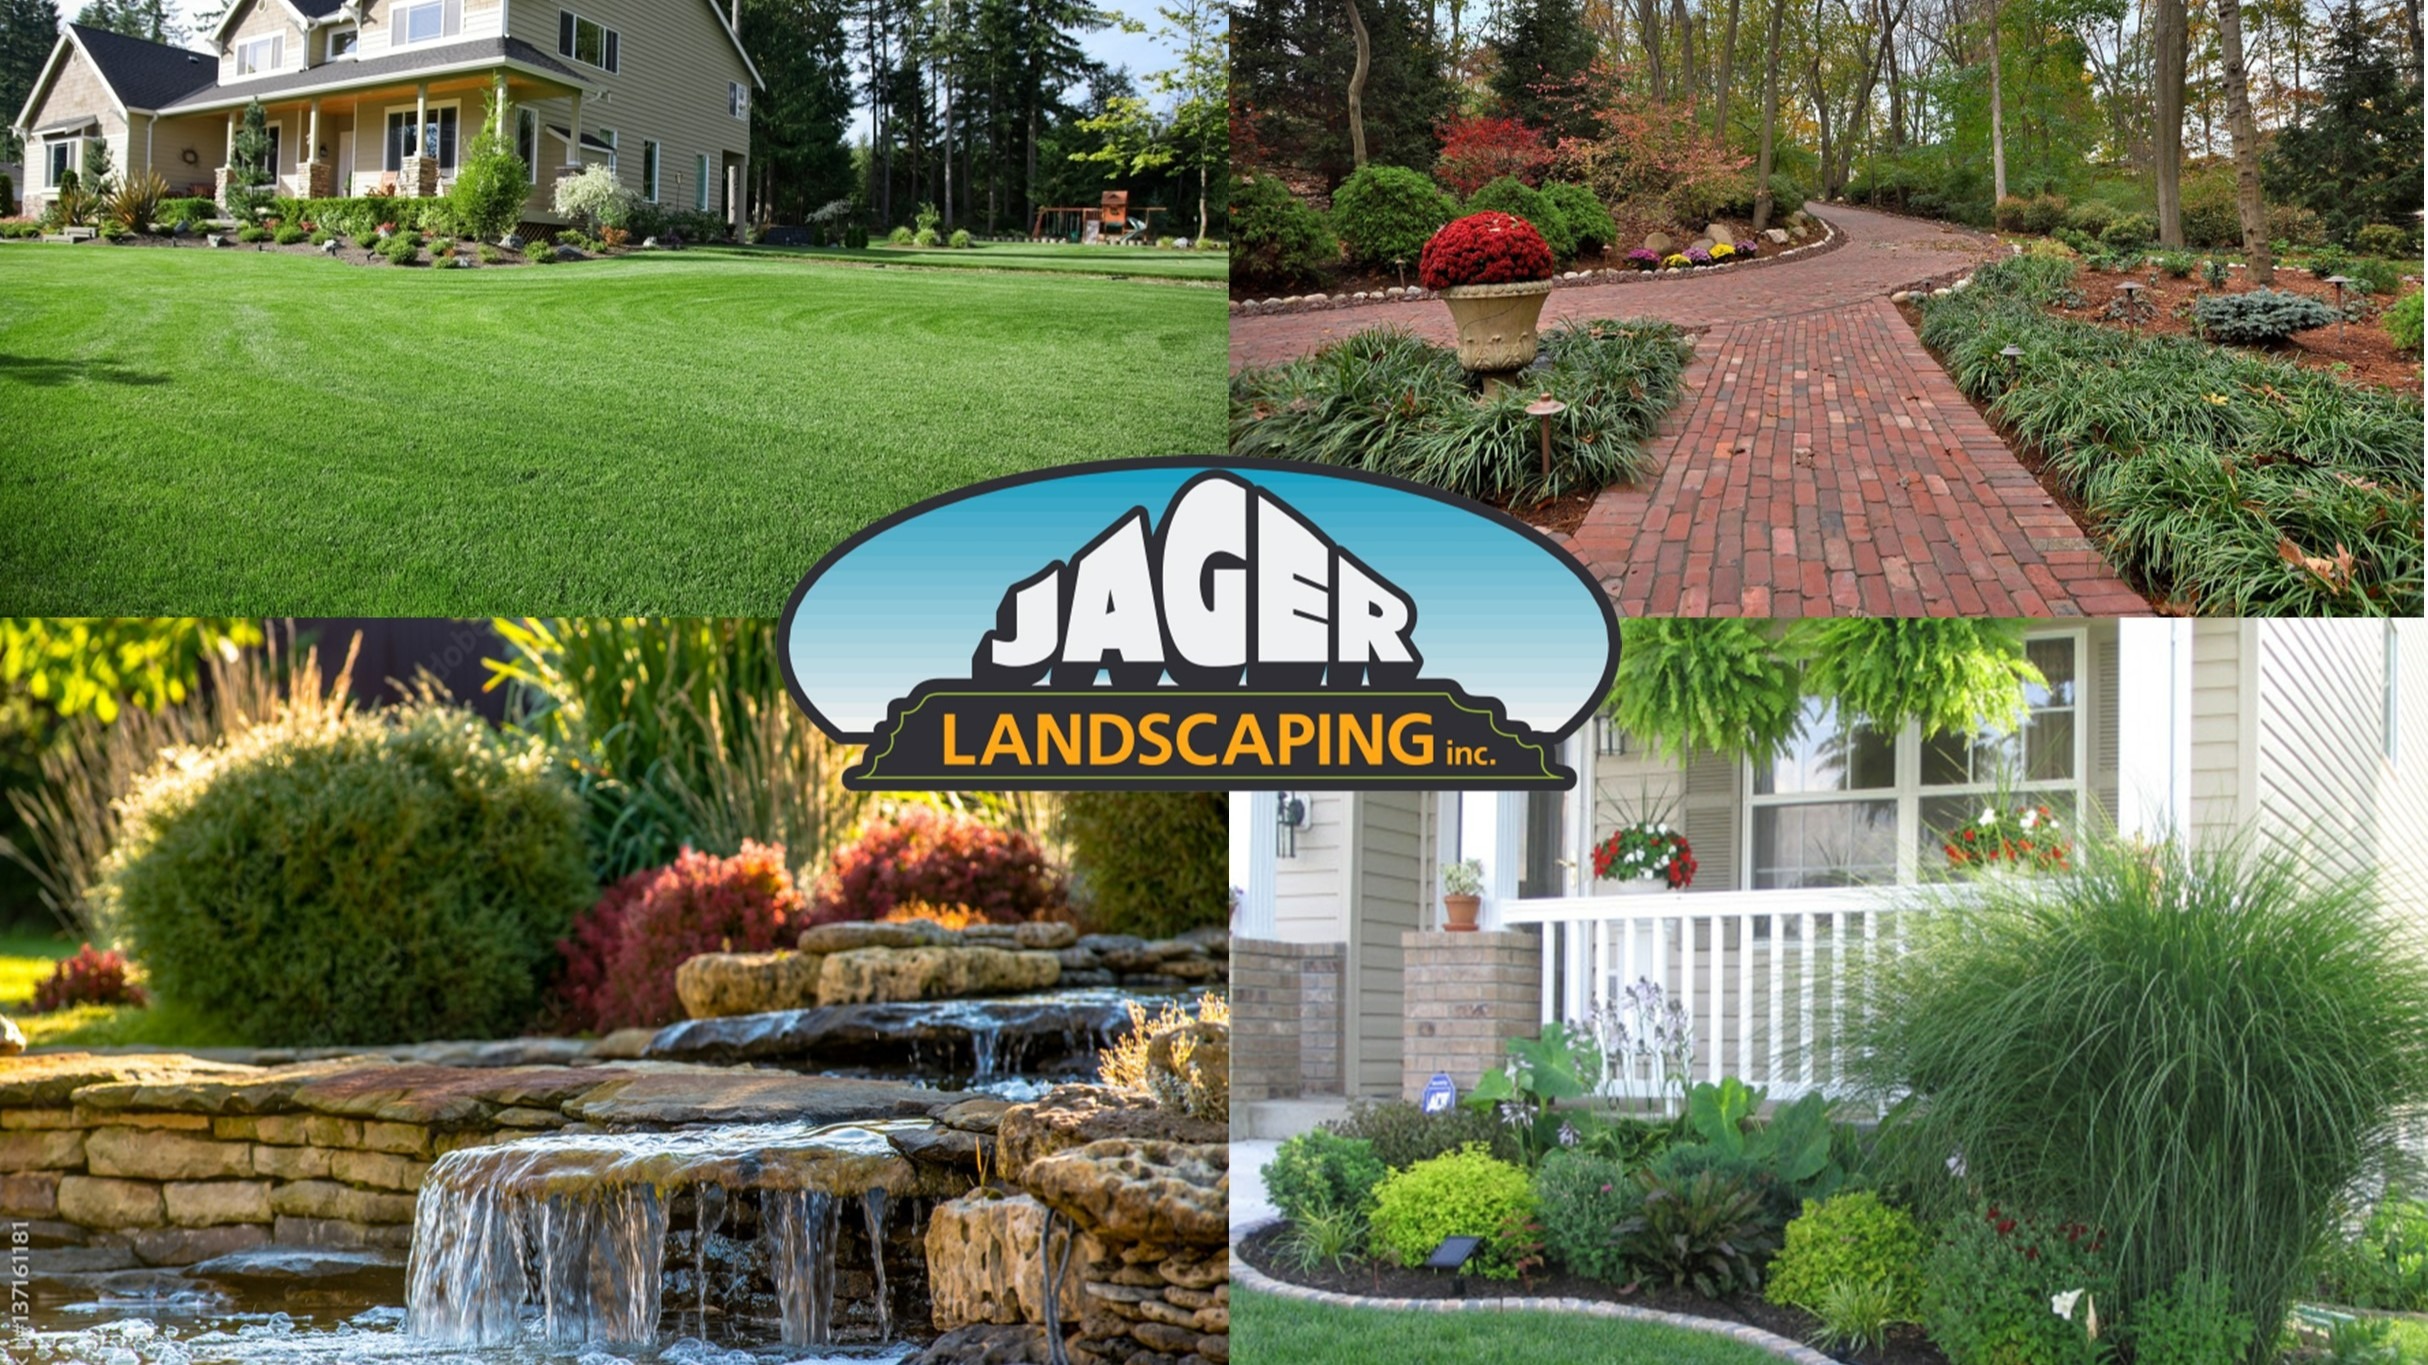 The Landscaping Project You Always Dreamed About with Interest-free Financing